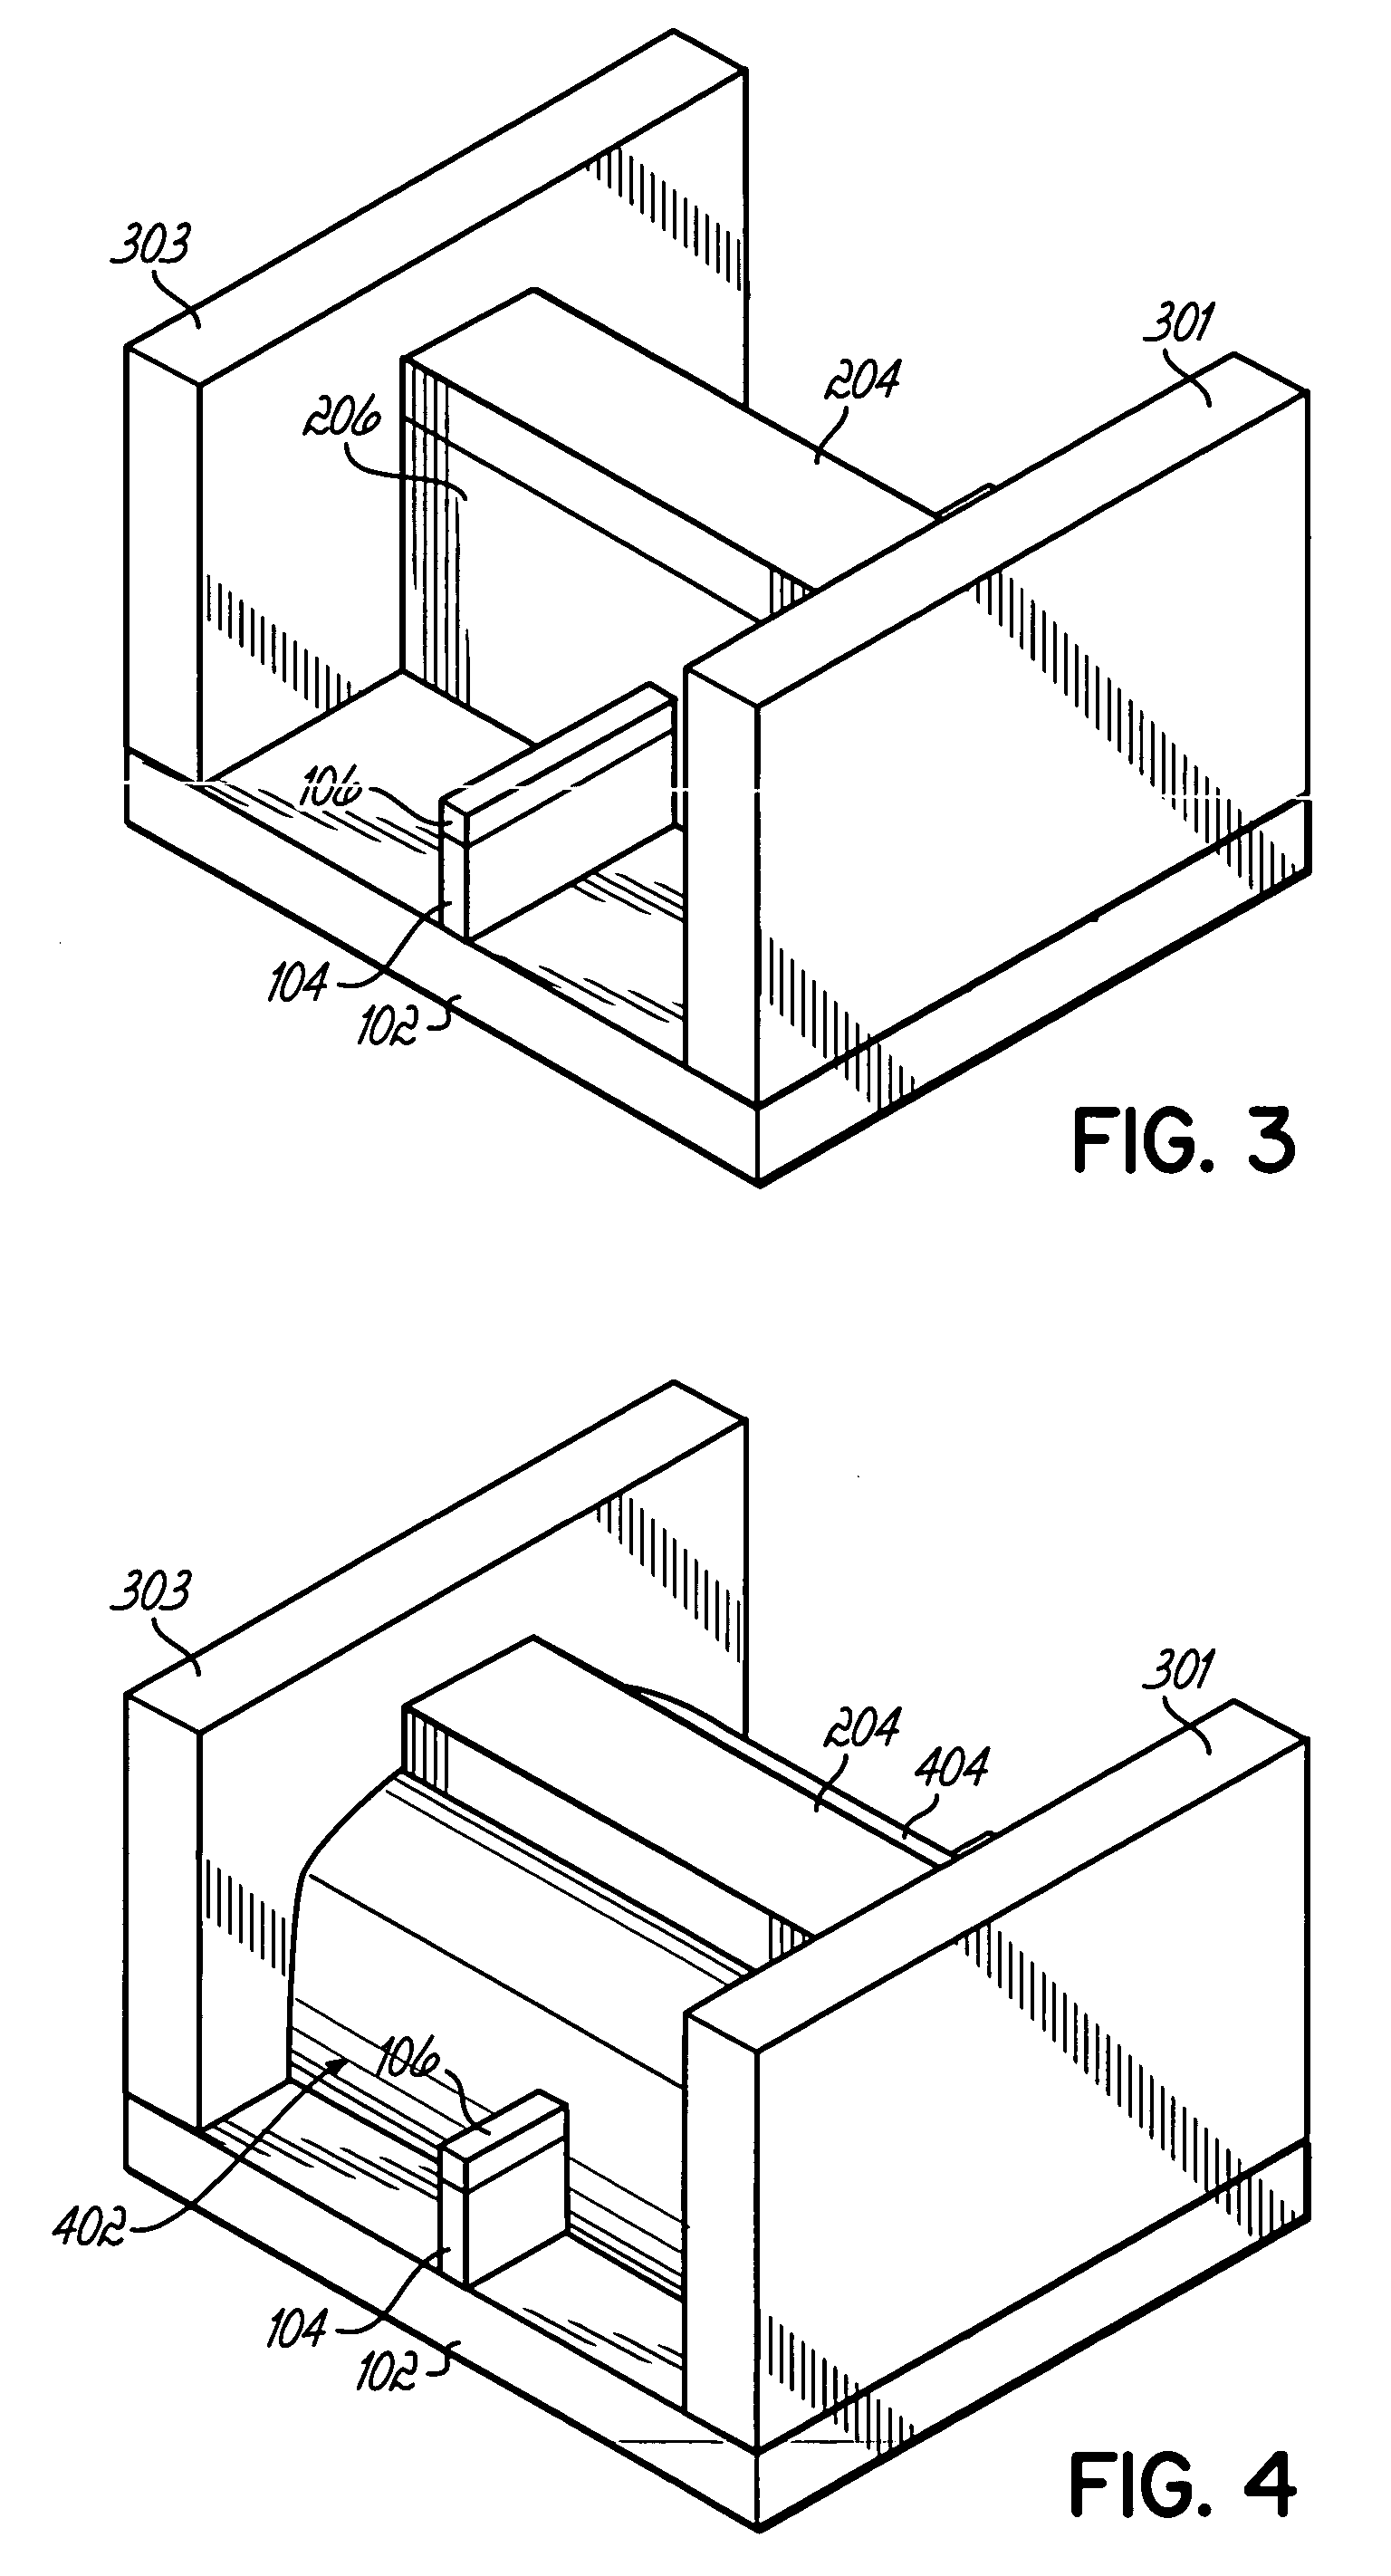 Method of forming FinFET gates without long etches